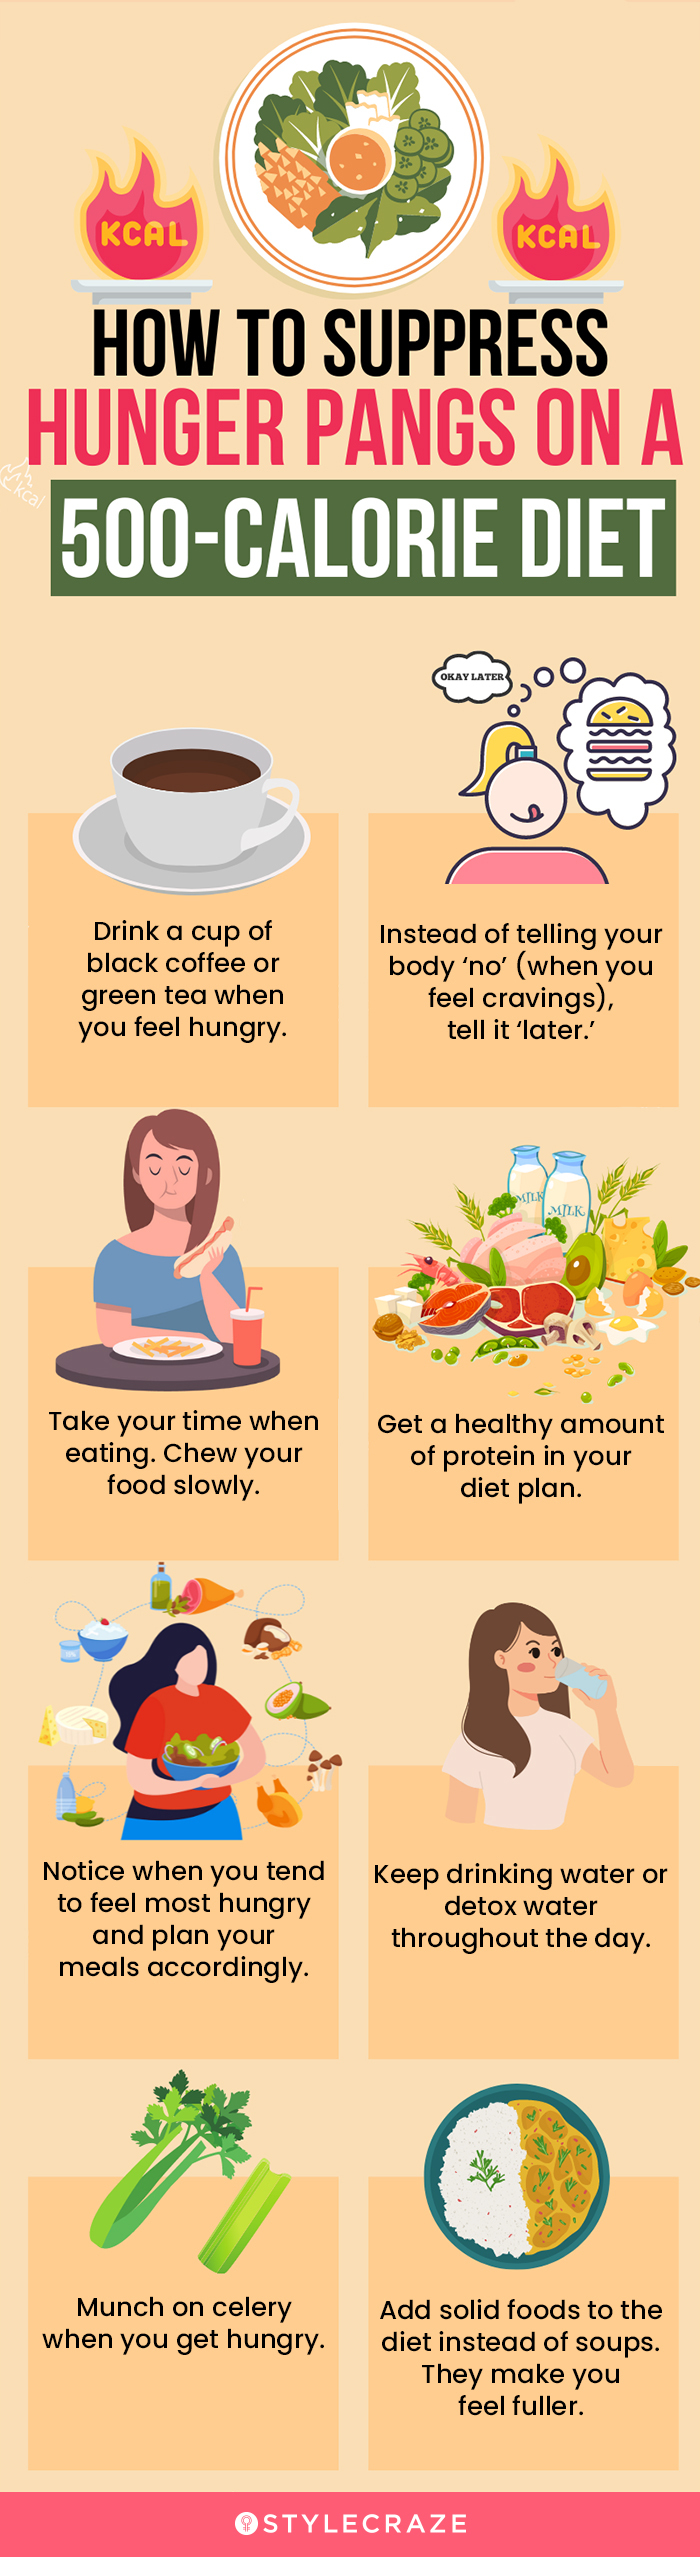 how to suppress hunger pangs on a 500-calorie diet (infographic)